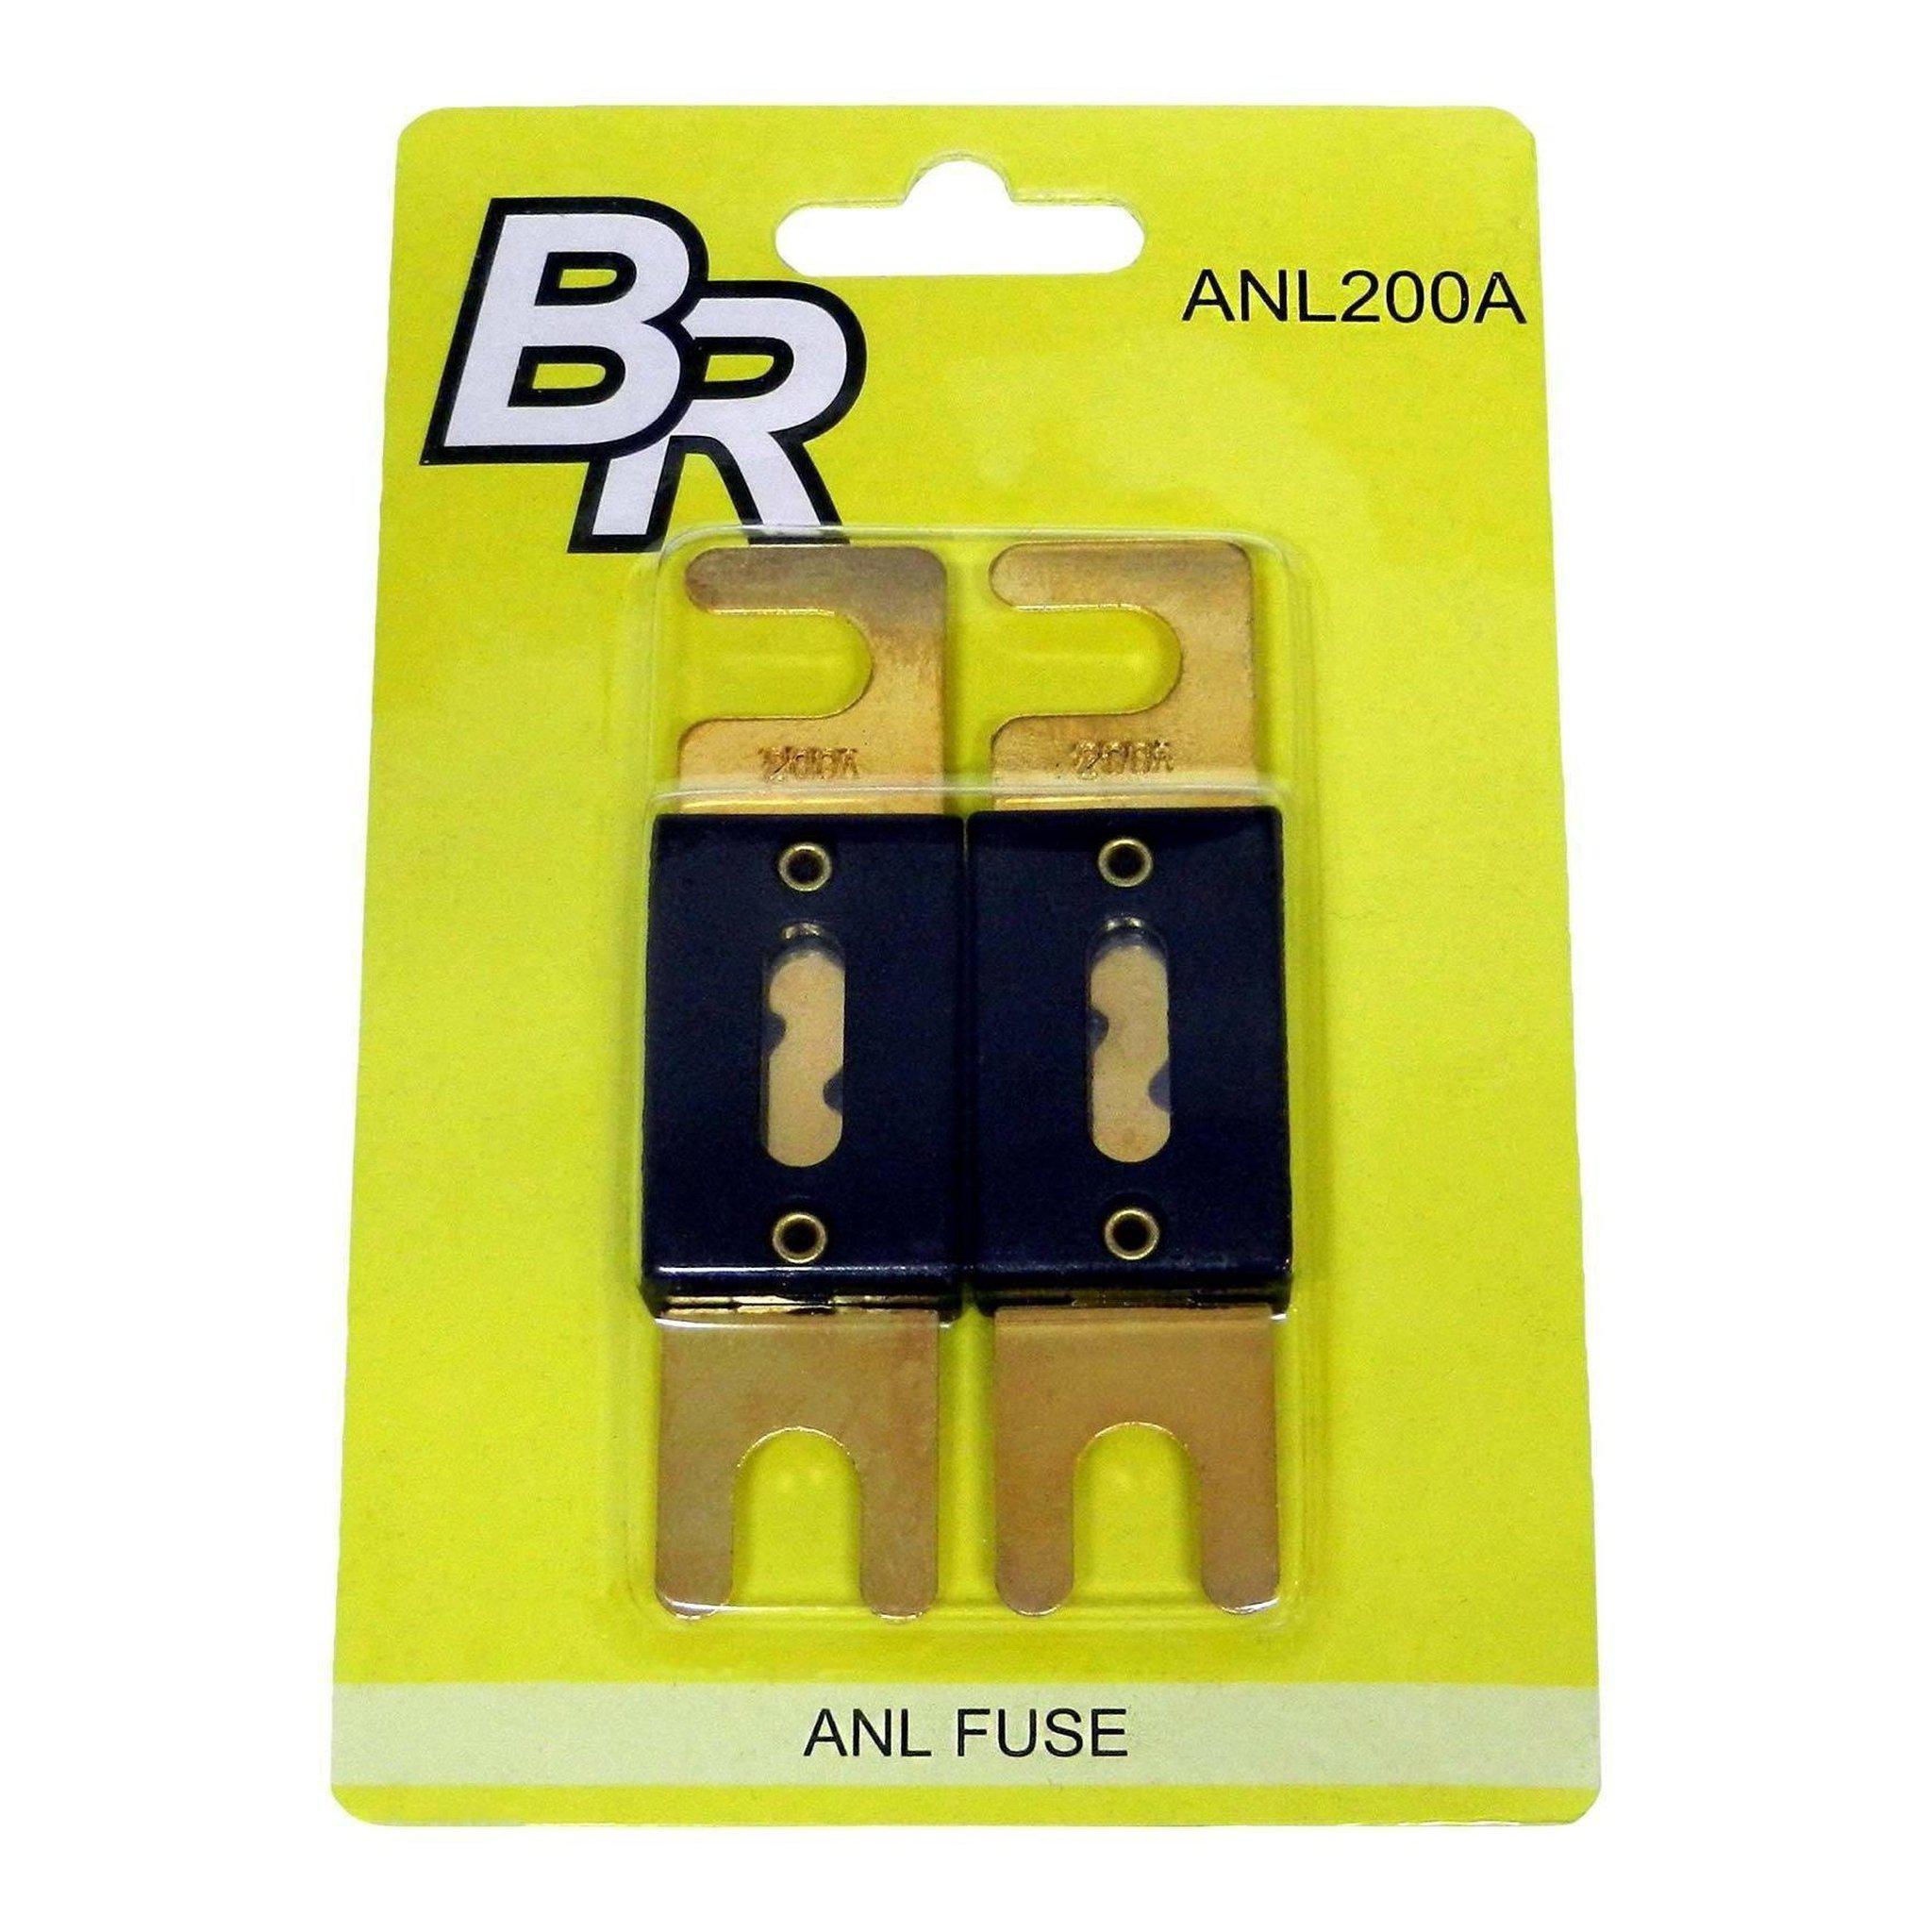 BRANL200A Gold Plated Audio ANL Fuse 200A (2 Pieces)-Bass Rockers-3